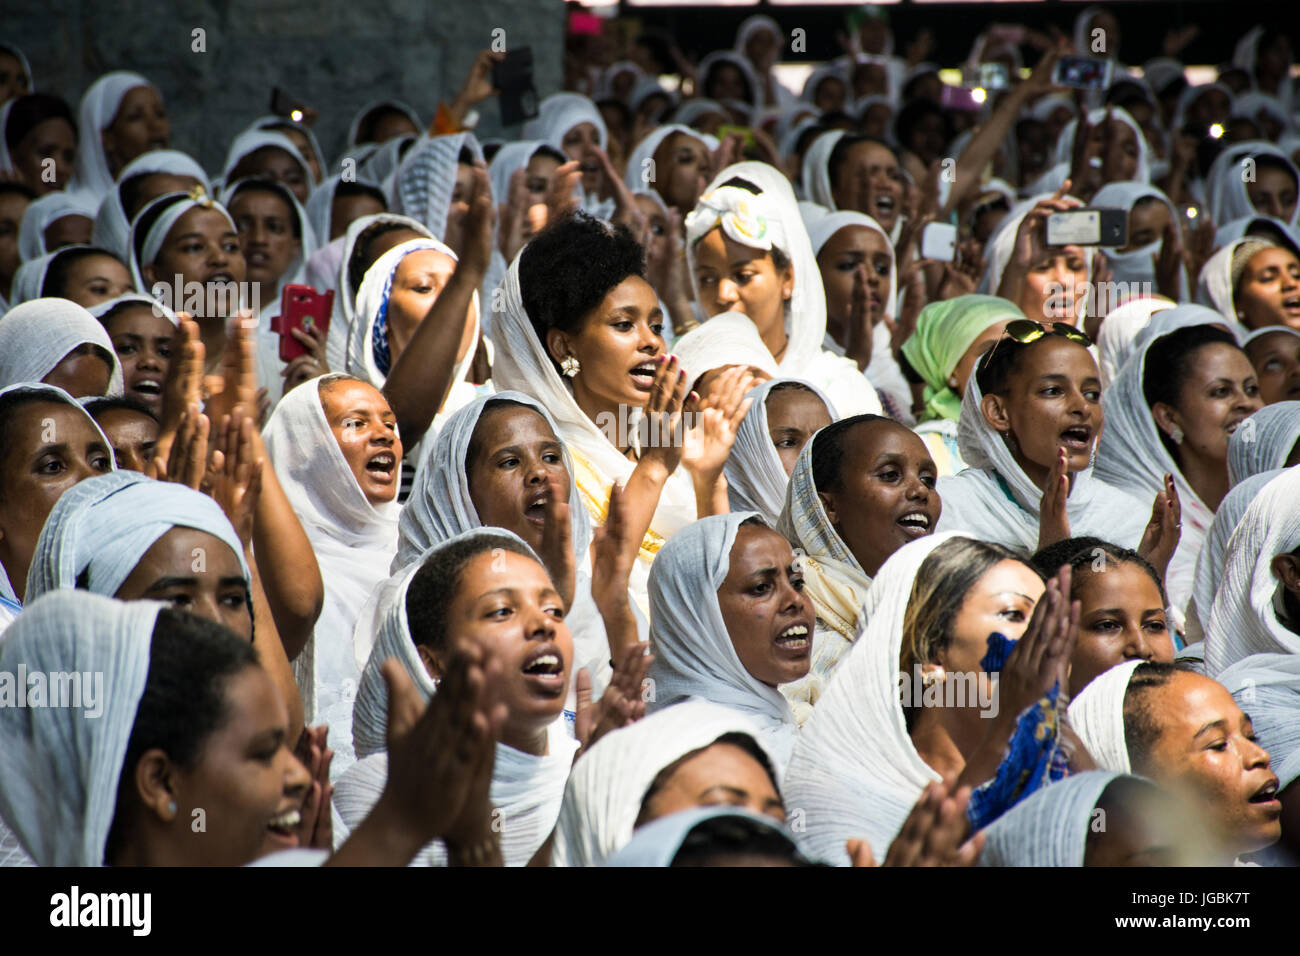 Ethiopian Orthodox Christian women during the St Yared day service inside Our Lady of Lebanon Church Harissa Lebanon. Stock Photo